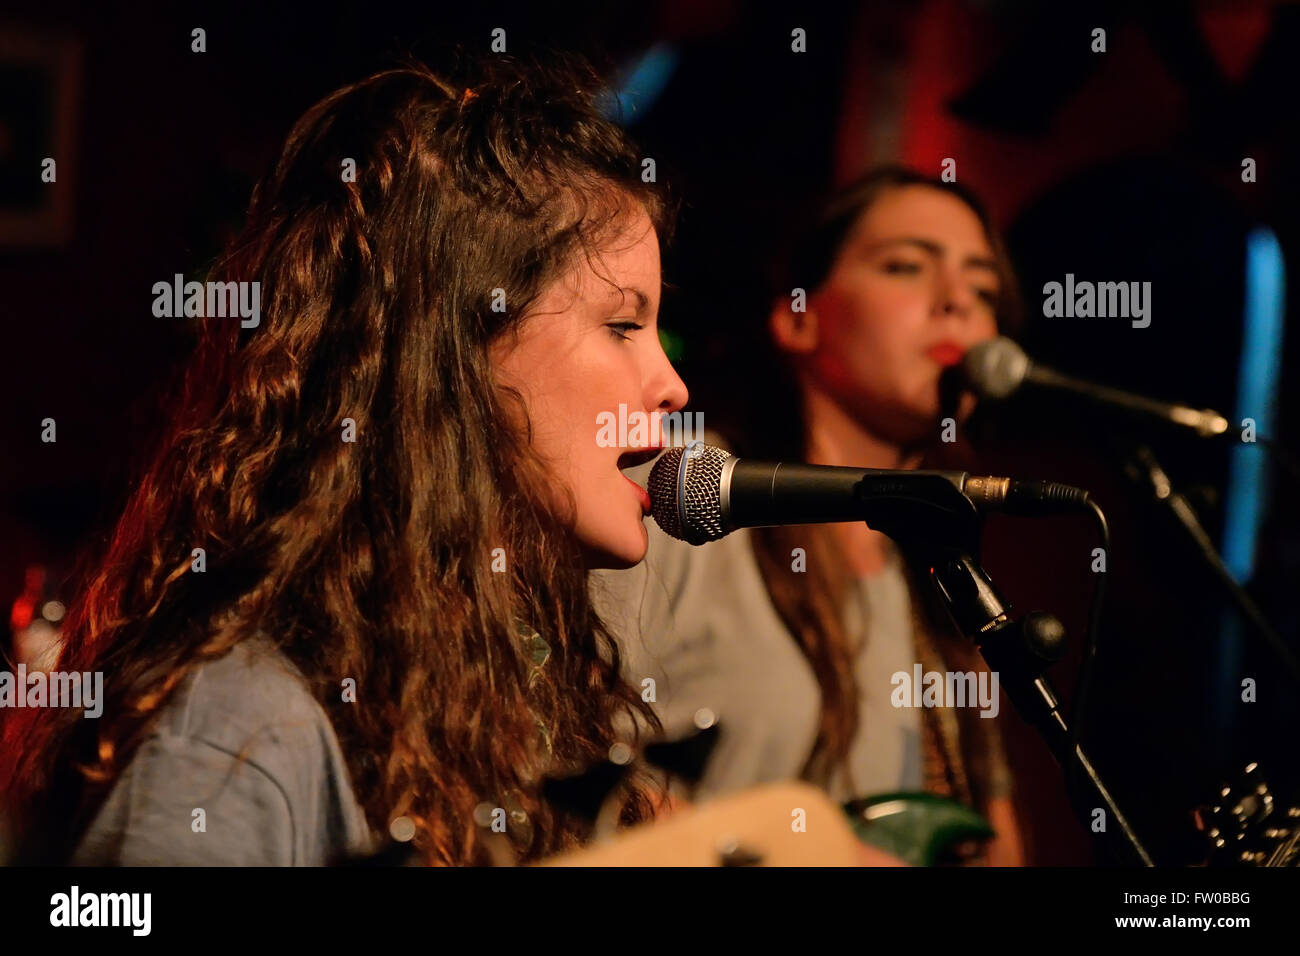 BARCELONA - JAN 8: The singer of Hinds (band also known as Deers) performs at Heliogabal club. Stock Photo